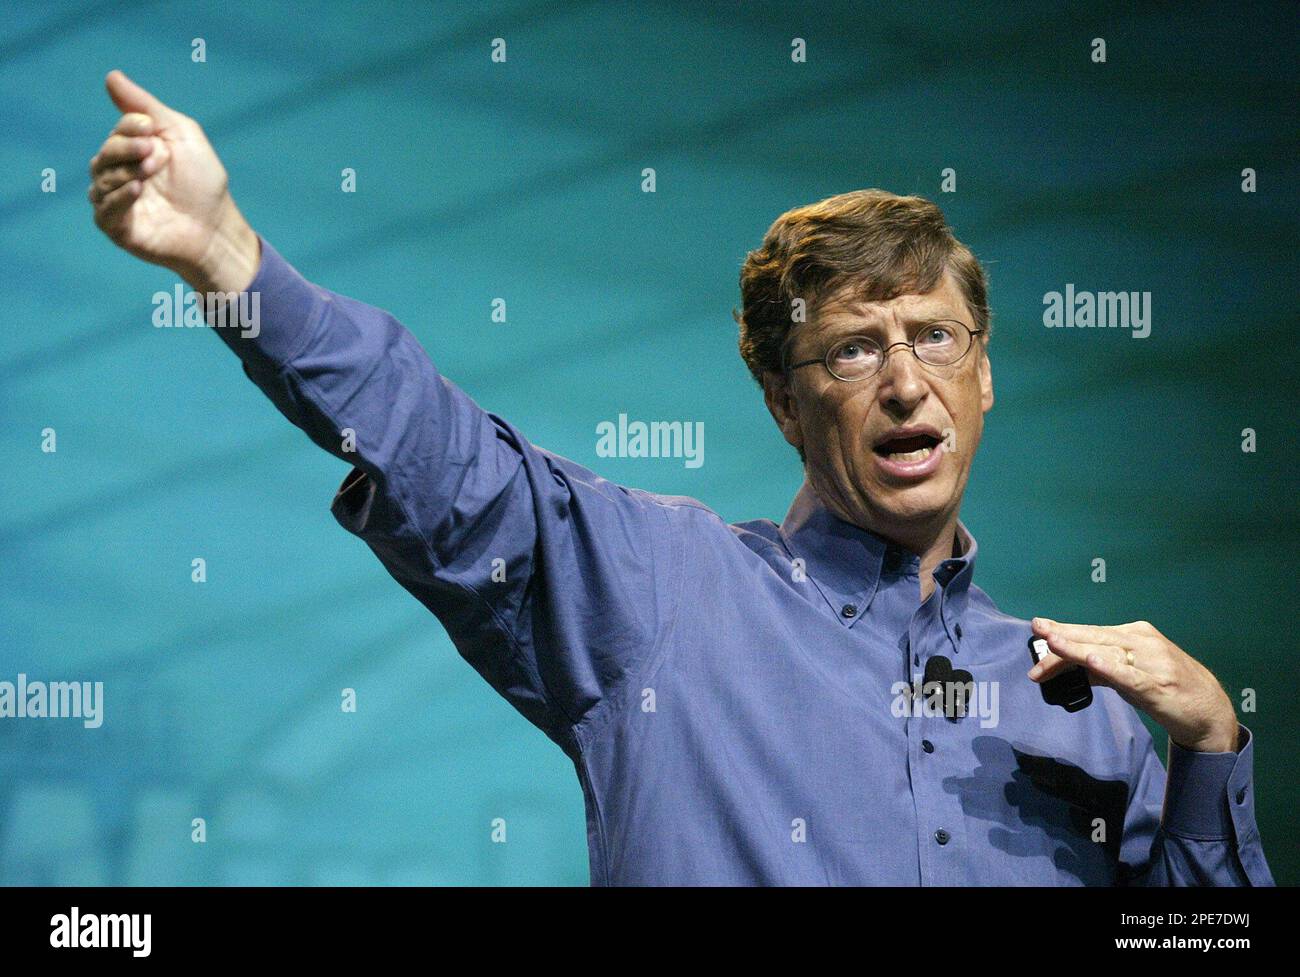 Microsoft Corp. Chairman Bill Gates gives the keynote address Monday, April 25, 2005 in Seattle at the 2005 Microsoft Windows Hardware Engineering Conference. Gates focused on the transition to 64-bit computing and the future of the company's next operating system, code-named "Longhorn." (AP Photo/Ted S. Warren) Stock Photo